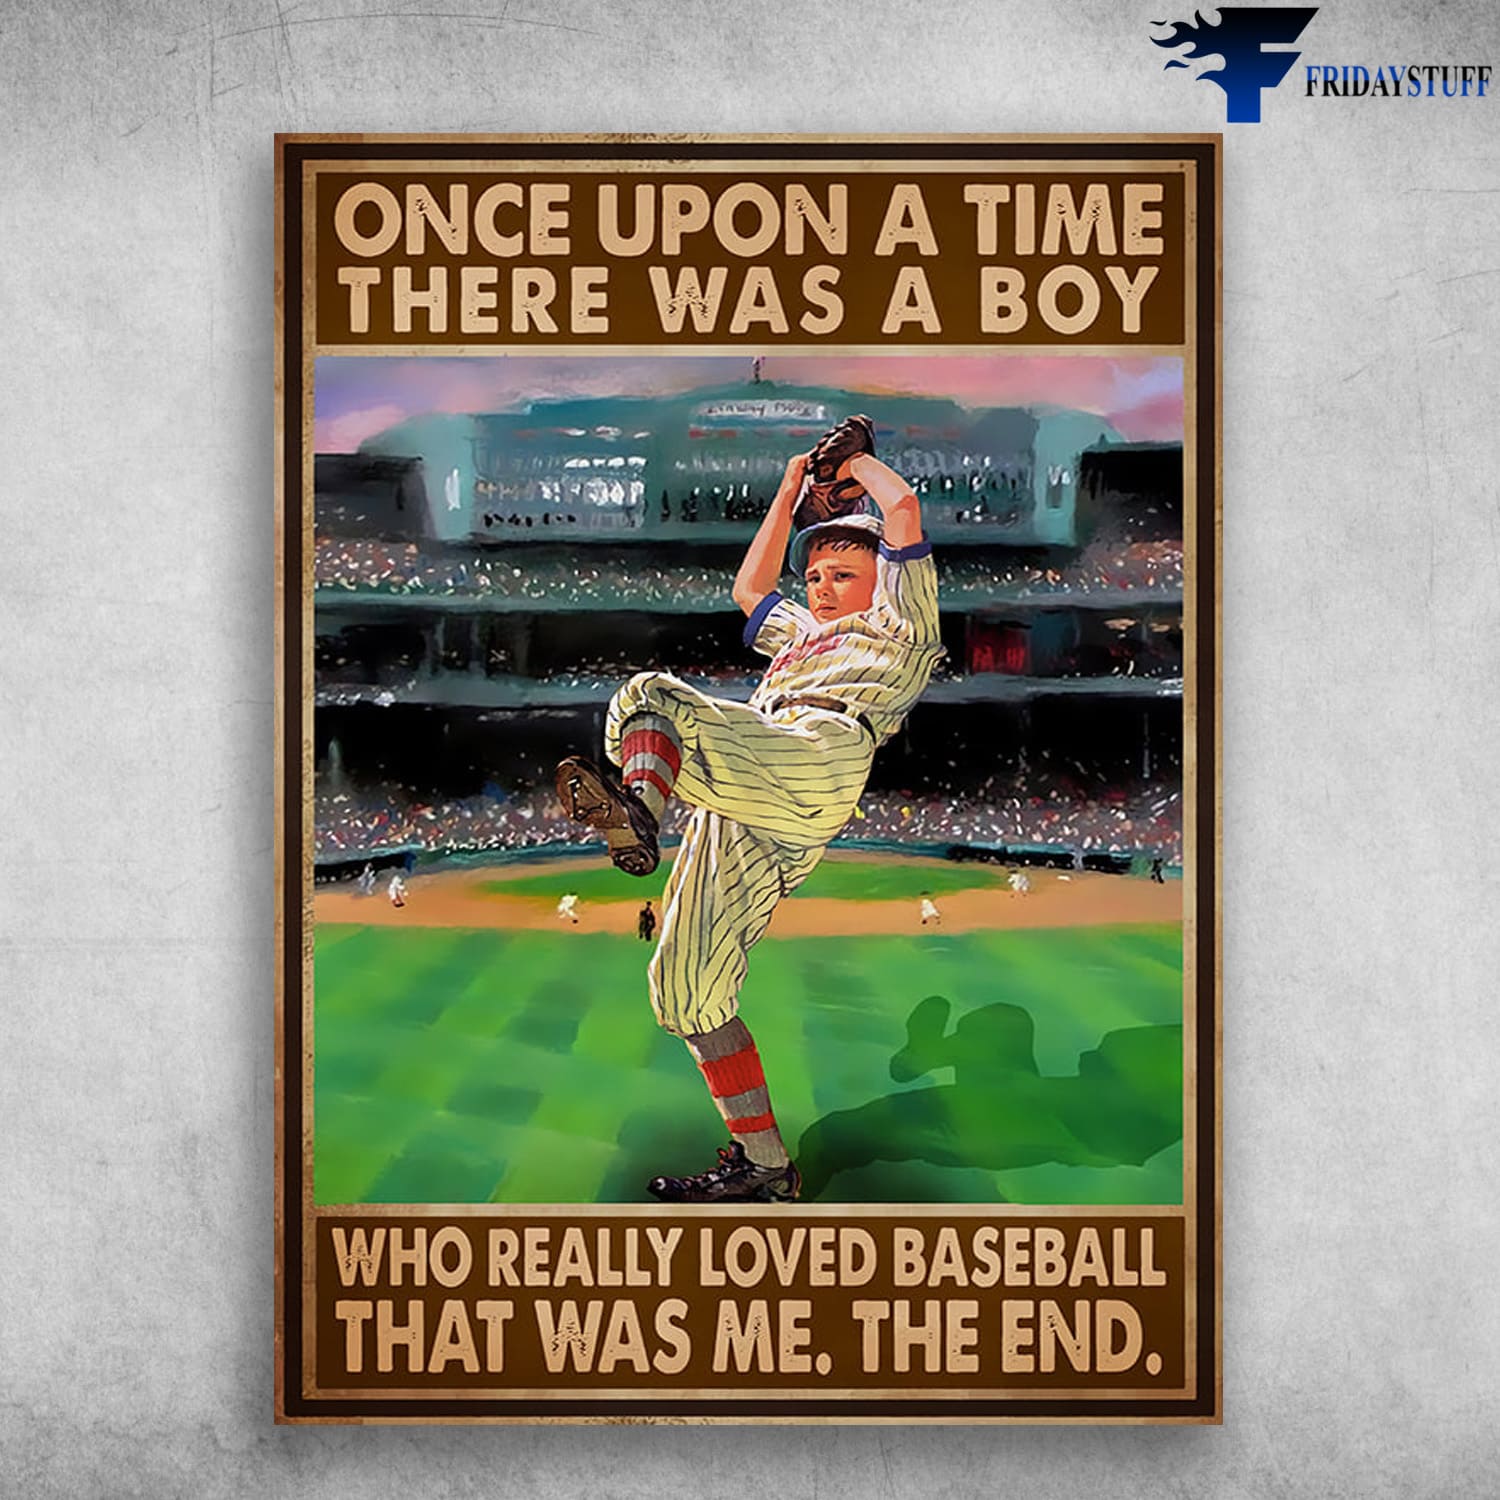 Baseball Poster, Baseball Boy, Once Upon A Time, There Was A Boy, Who Really Loved Baseball, It Was Me, The End